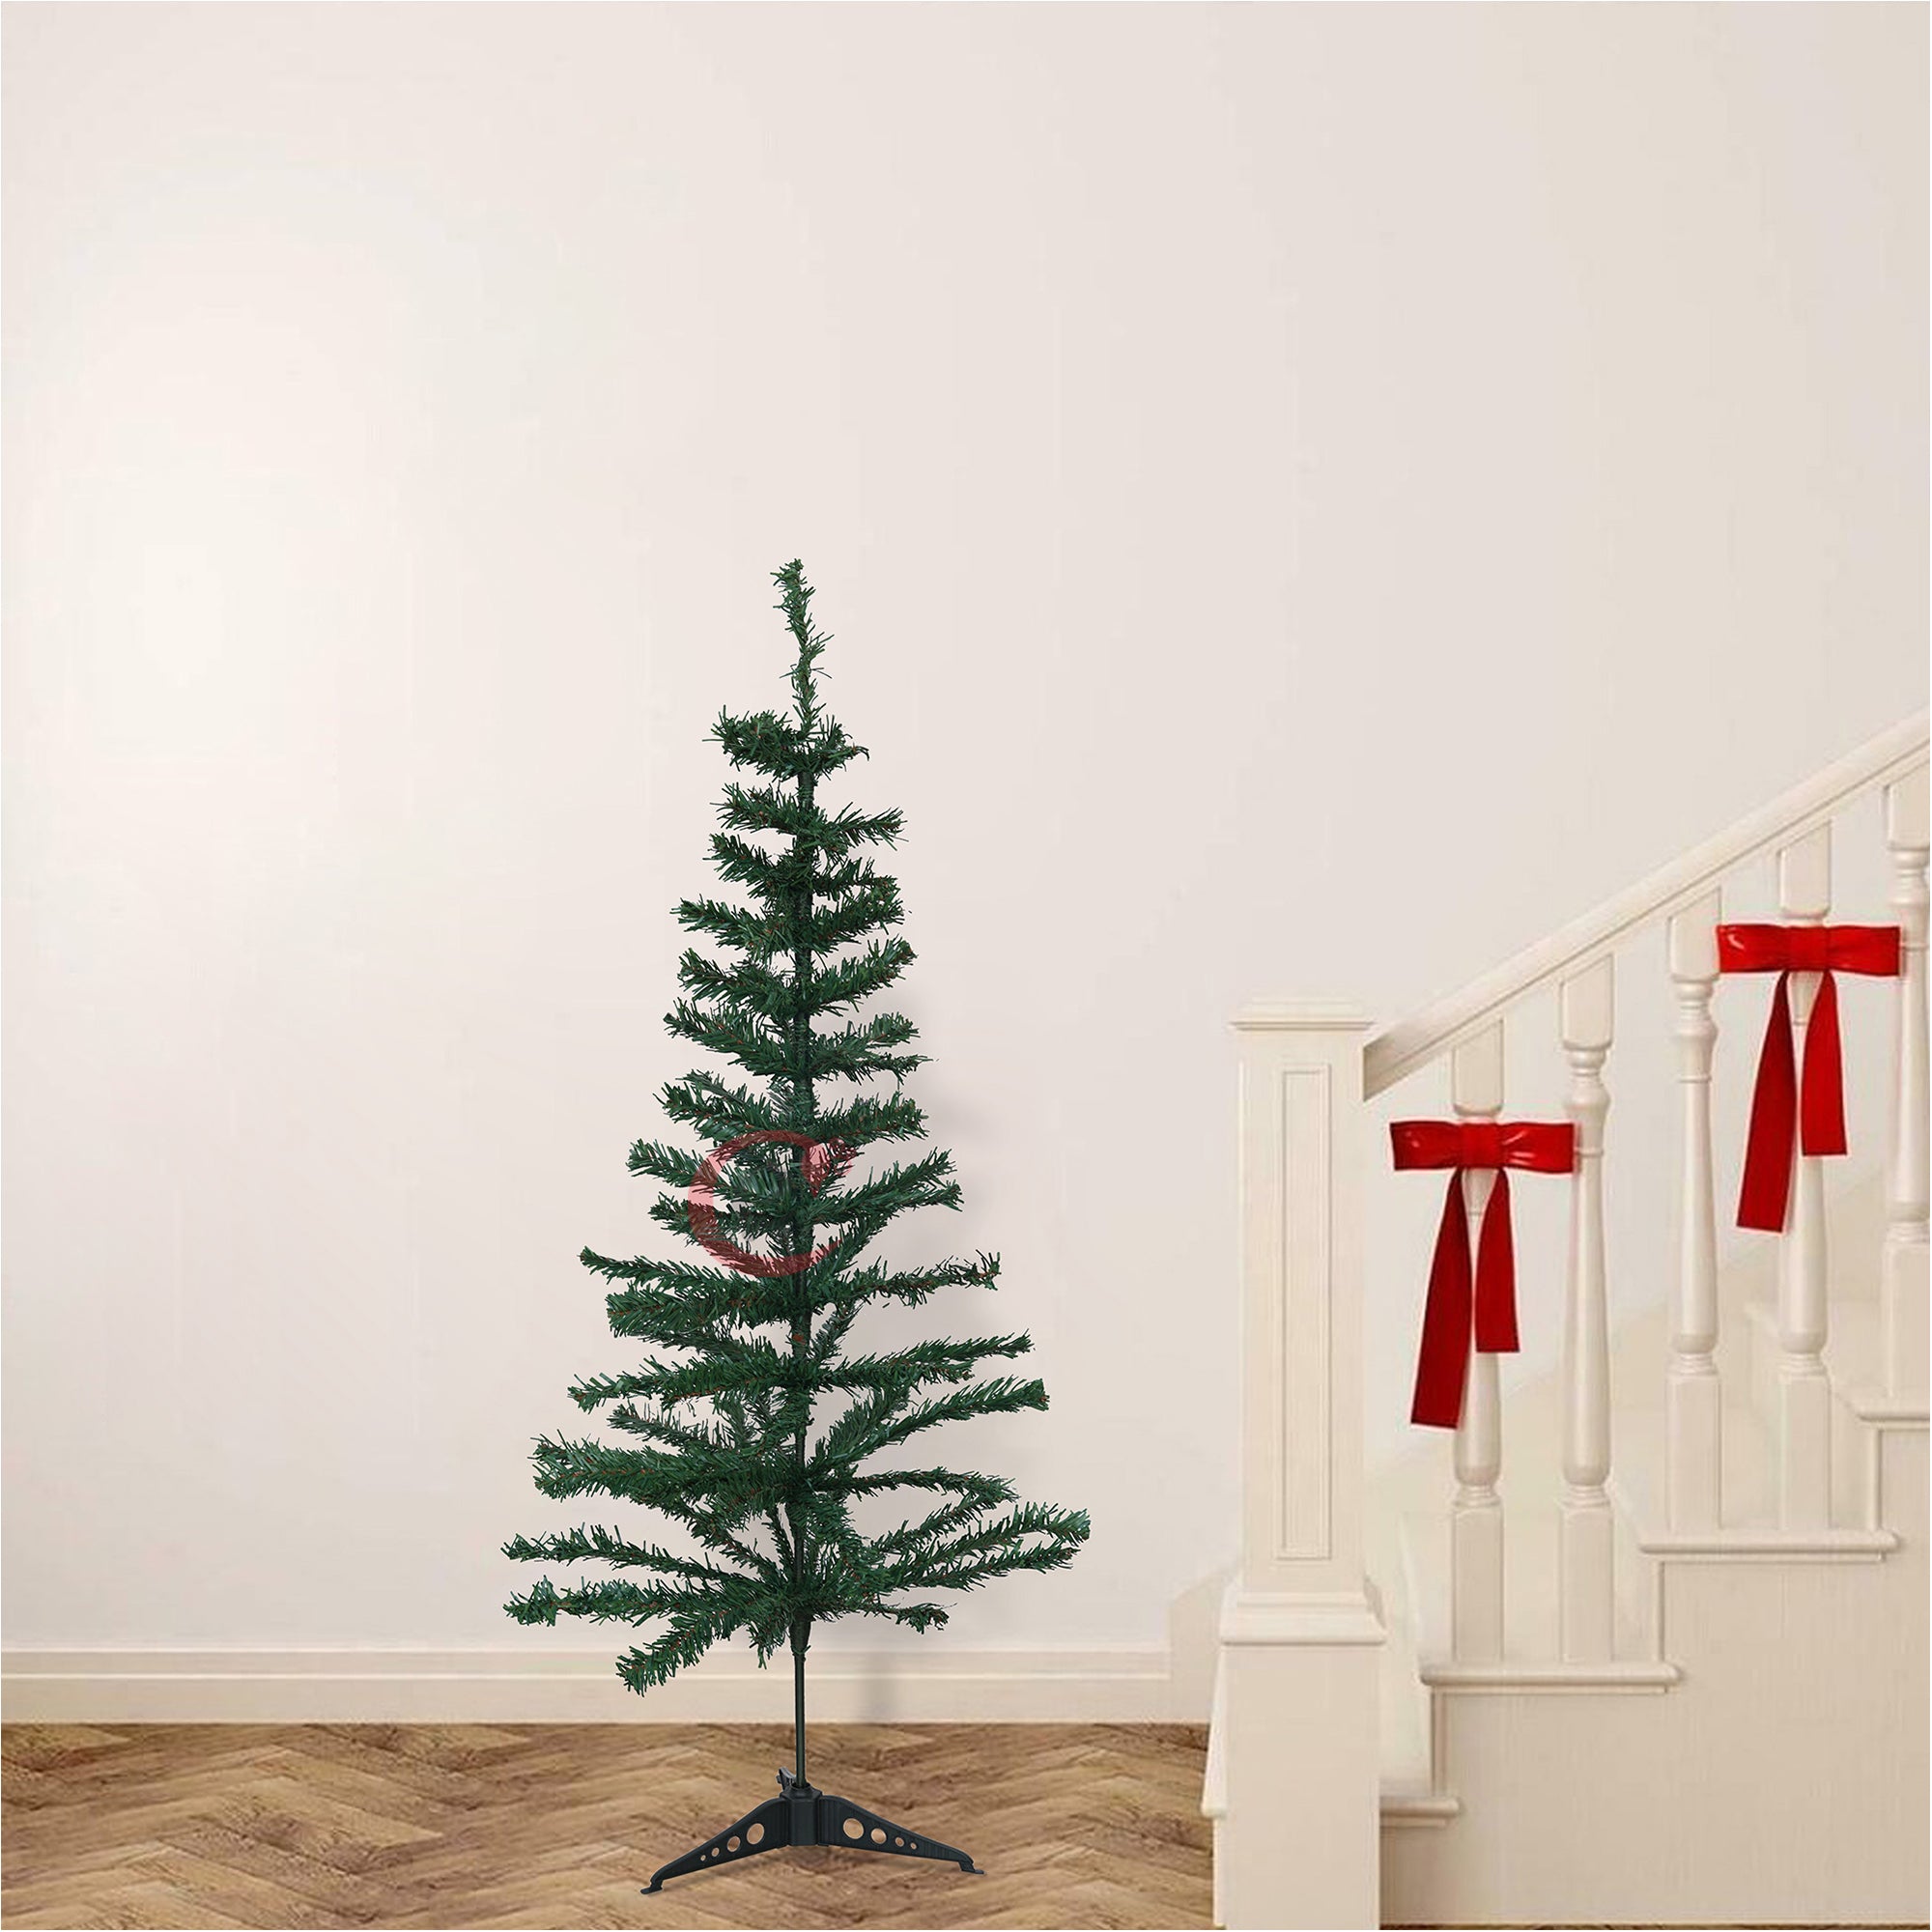 eCraftIndia 4 Feet Green Artificial Christmas Tree Xmas Pine Tree with Stand and 60 Christmas Decoration Ornaments Props - Merry Christmas Decoration Item for Home, Office, and Church 5